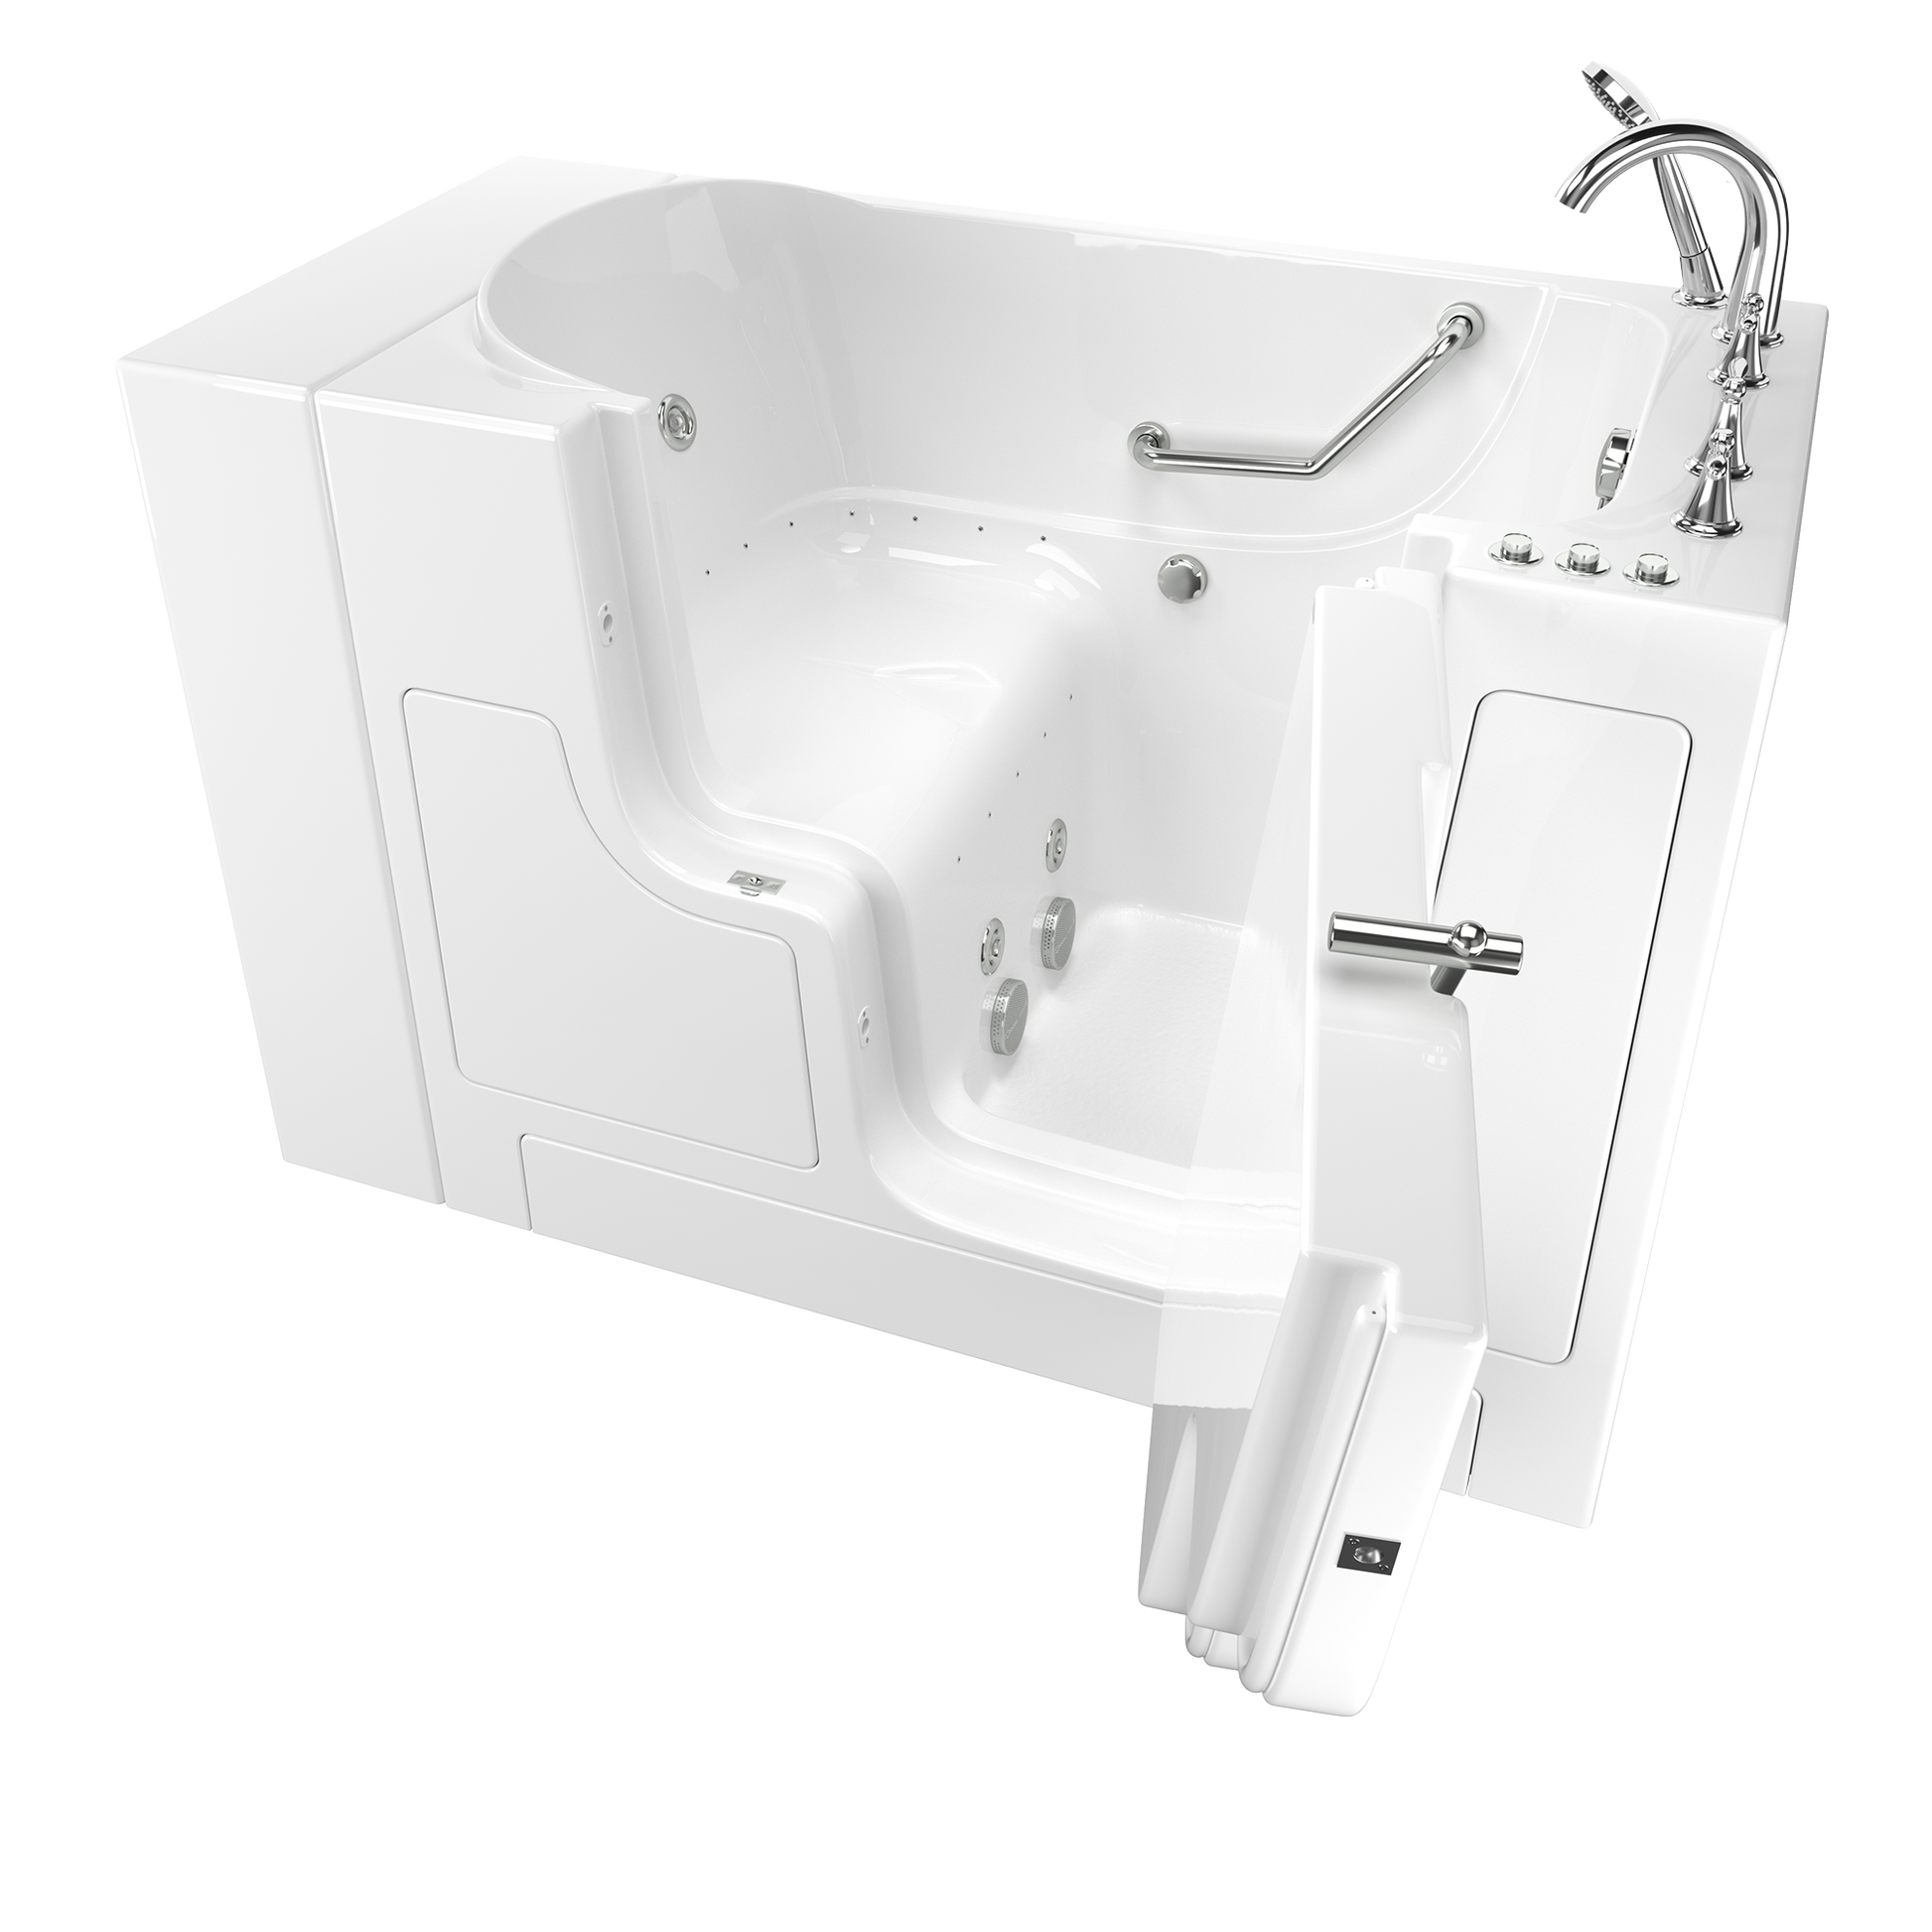 AMERICAN-STANDARD SS9OD5230RD-WH-PC, Gelcoat Premium Series 30 in. x 52 in. Outward Opening Door Walk-In Bathtub with Air Spa and Whirlpool system in Wib White